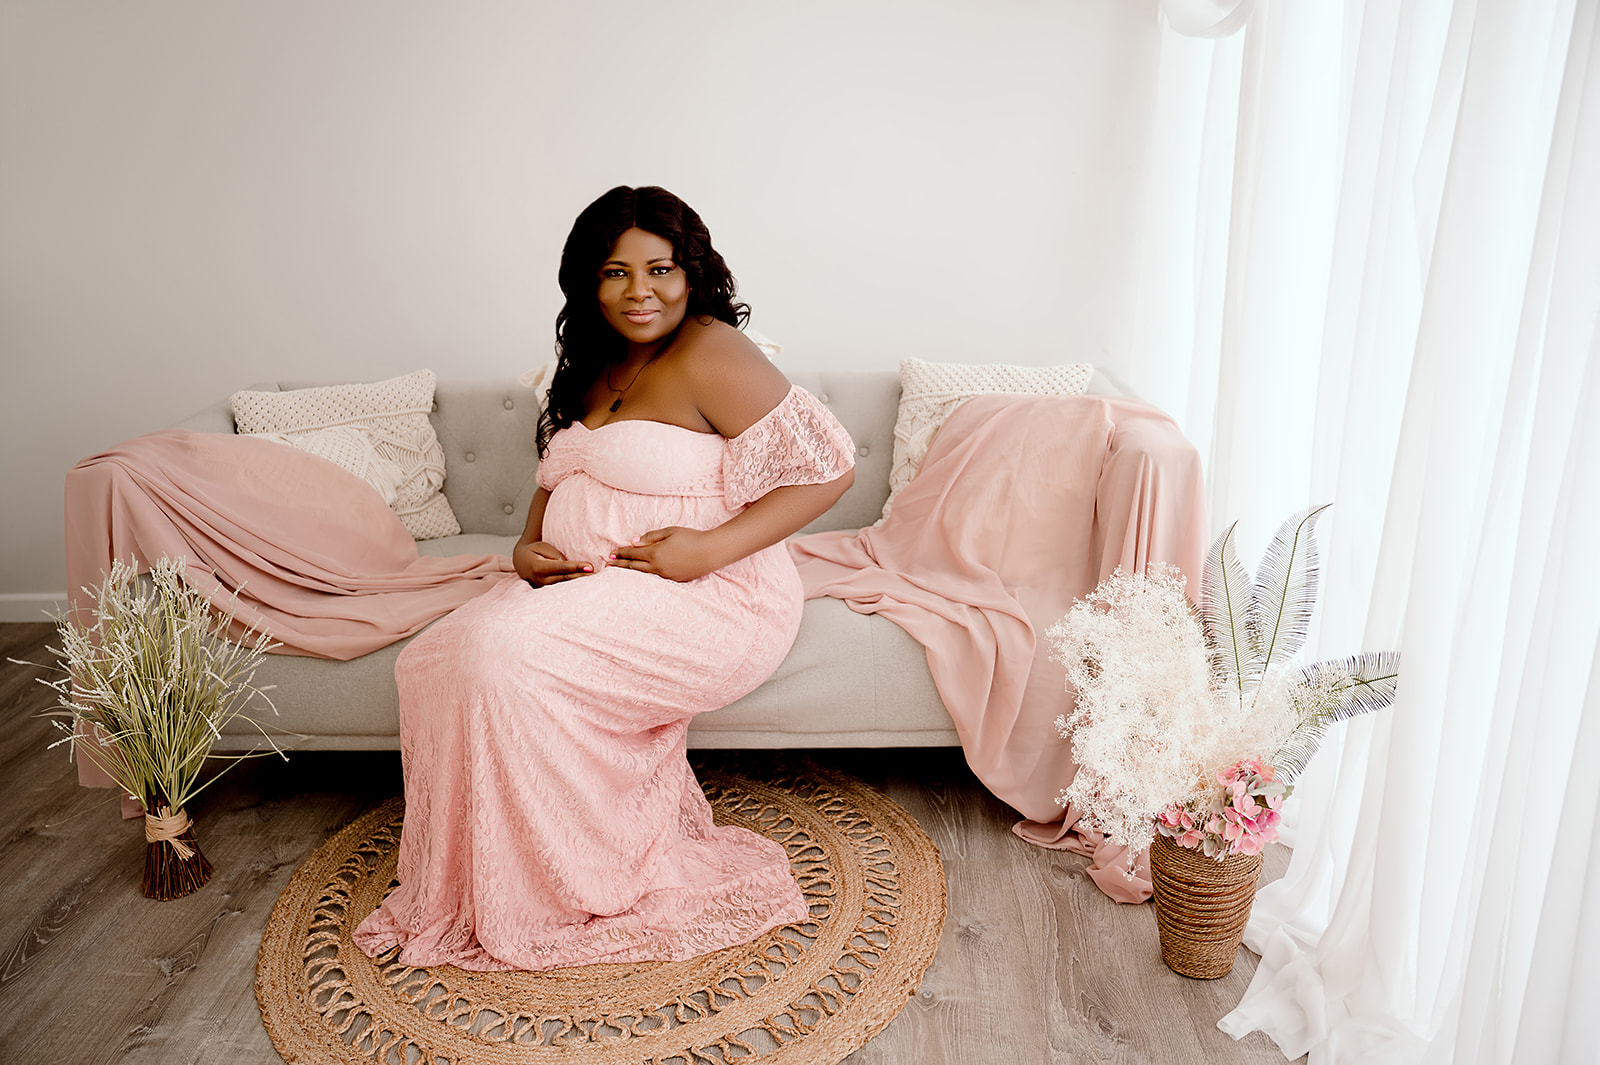 Central Minnesota maternity photographer with a studio and a client closet full of maternity gowns.